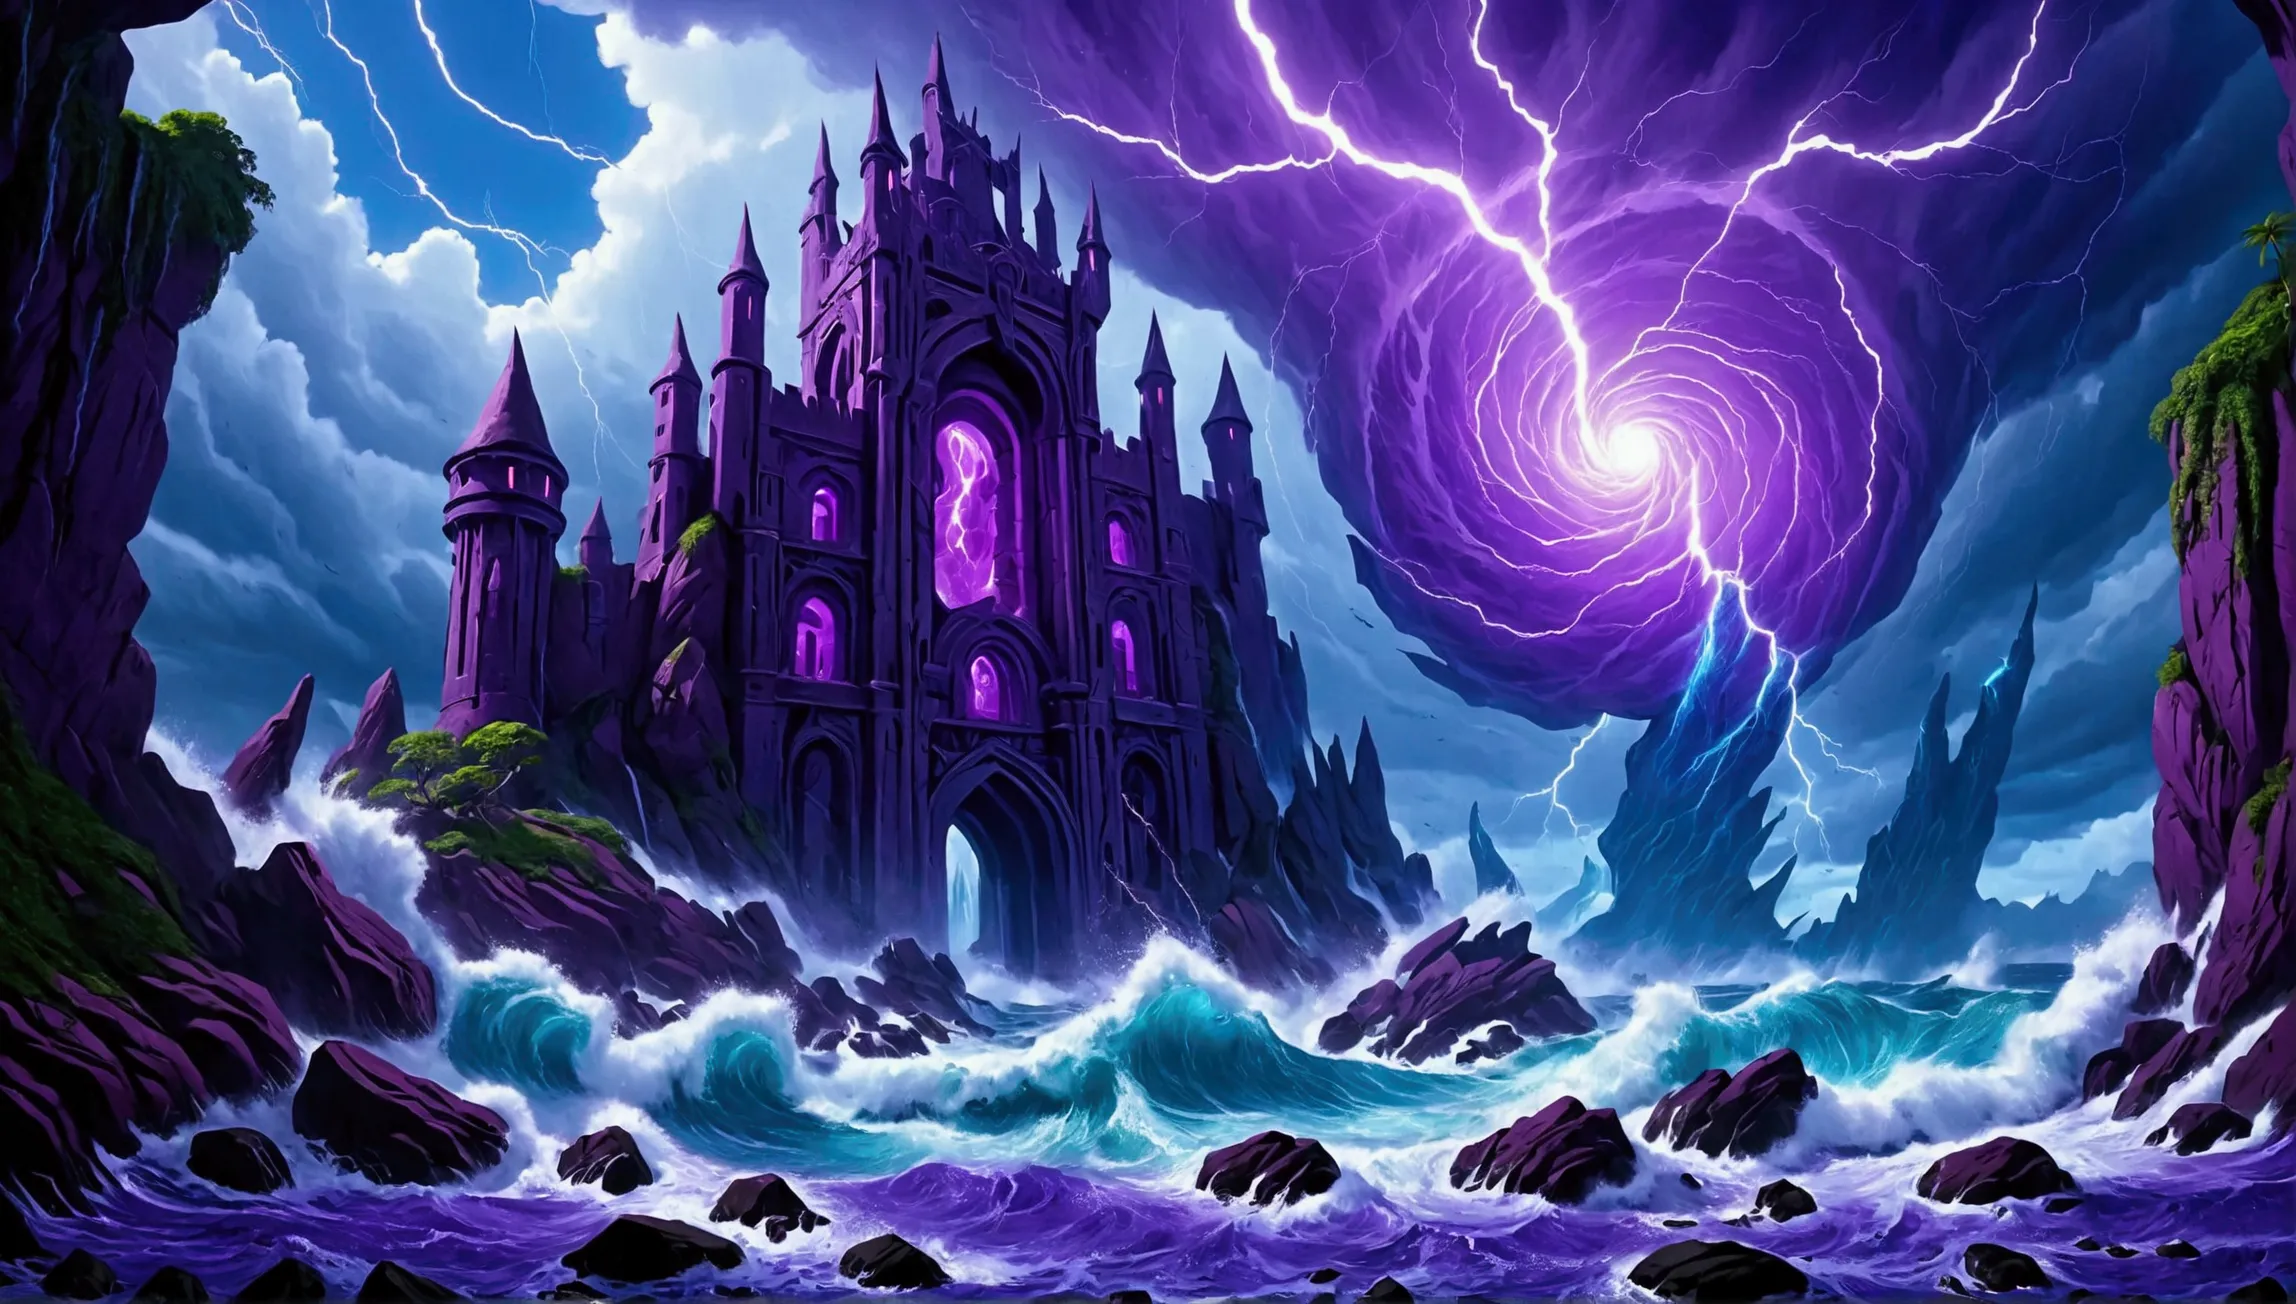 (Mysterious eerie citadel with intricate architecture:1.2) on rocks of tropical island))), crushing waves, purple-blue (otherwor...